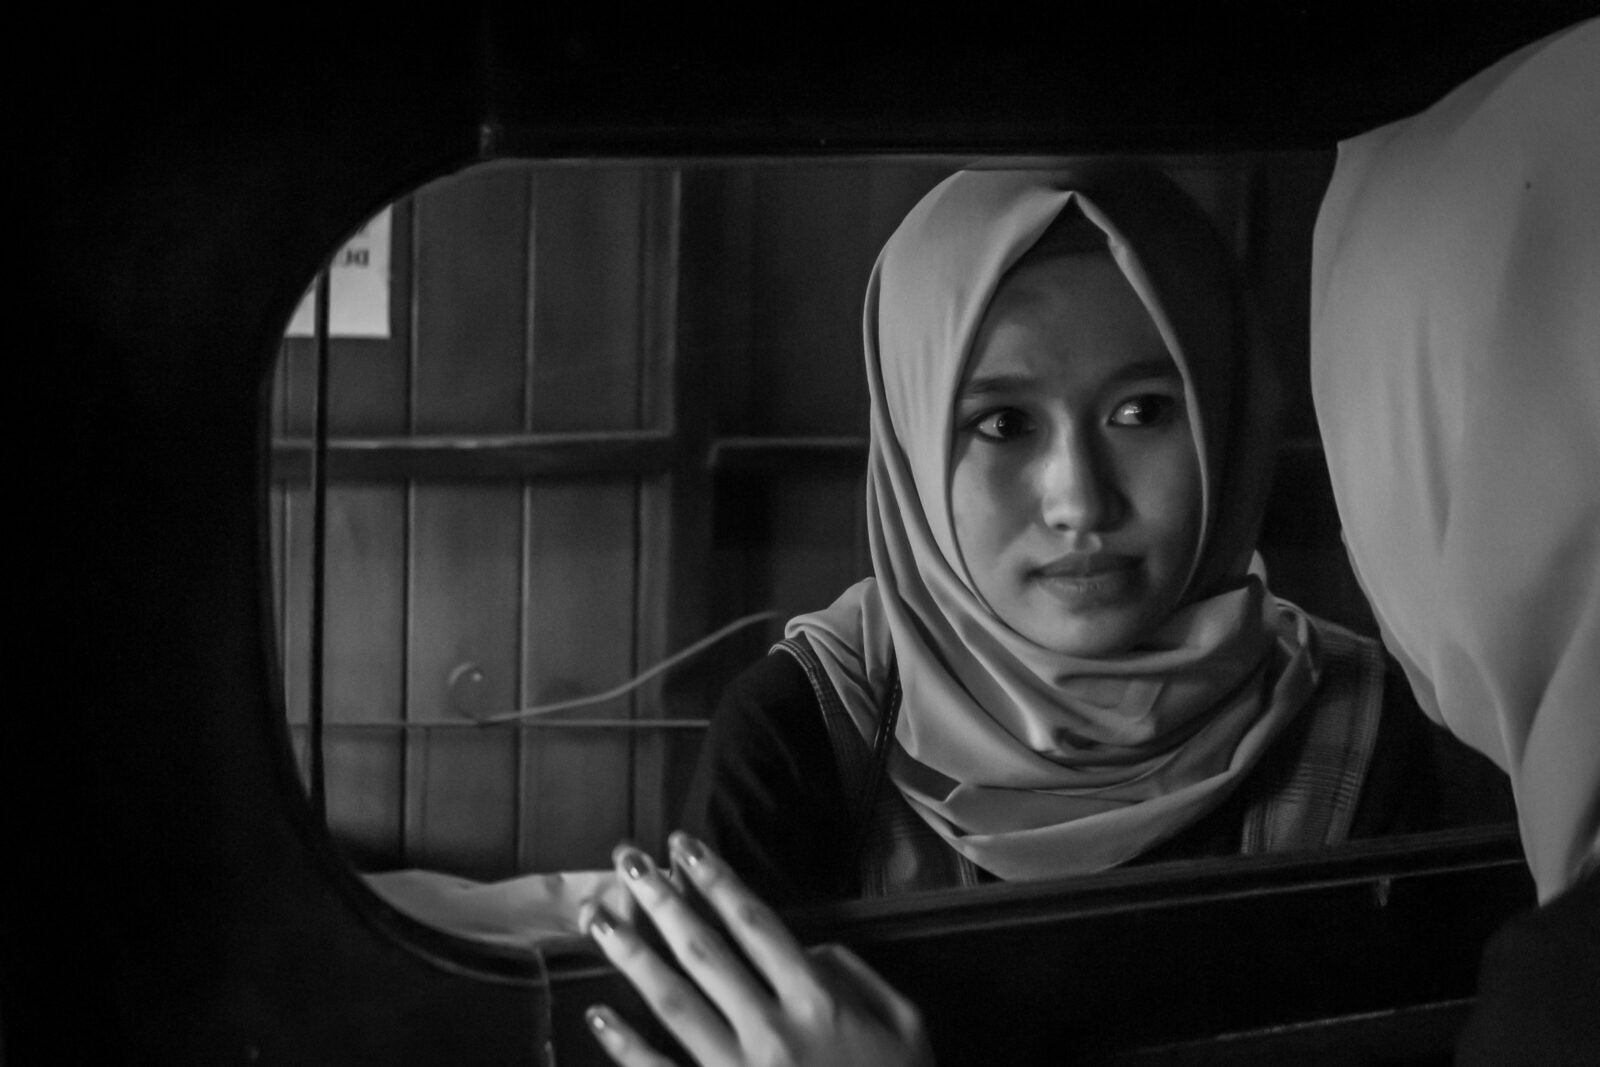 Grayscale Photo of a girl wearing the hijab Looking at a Mirror